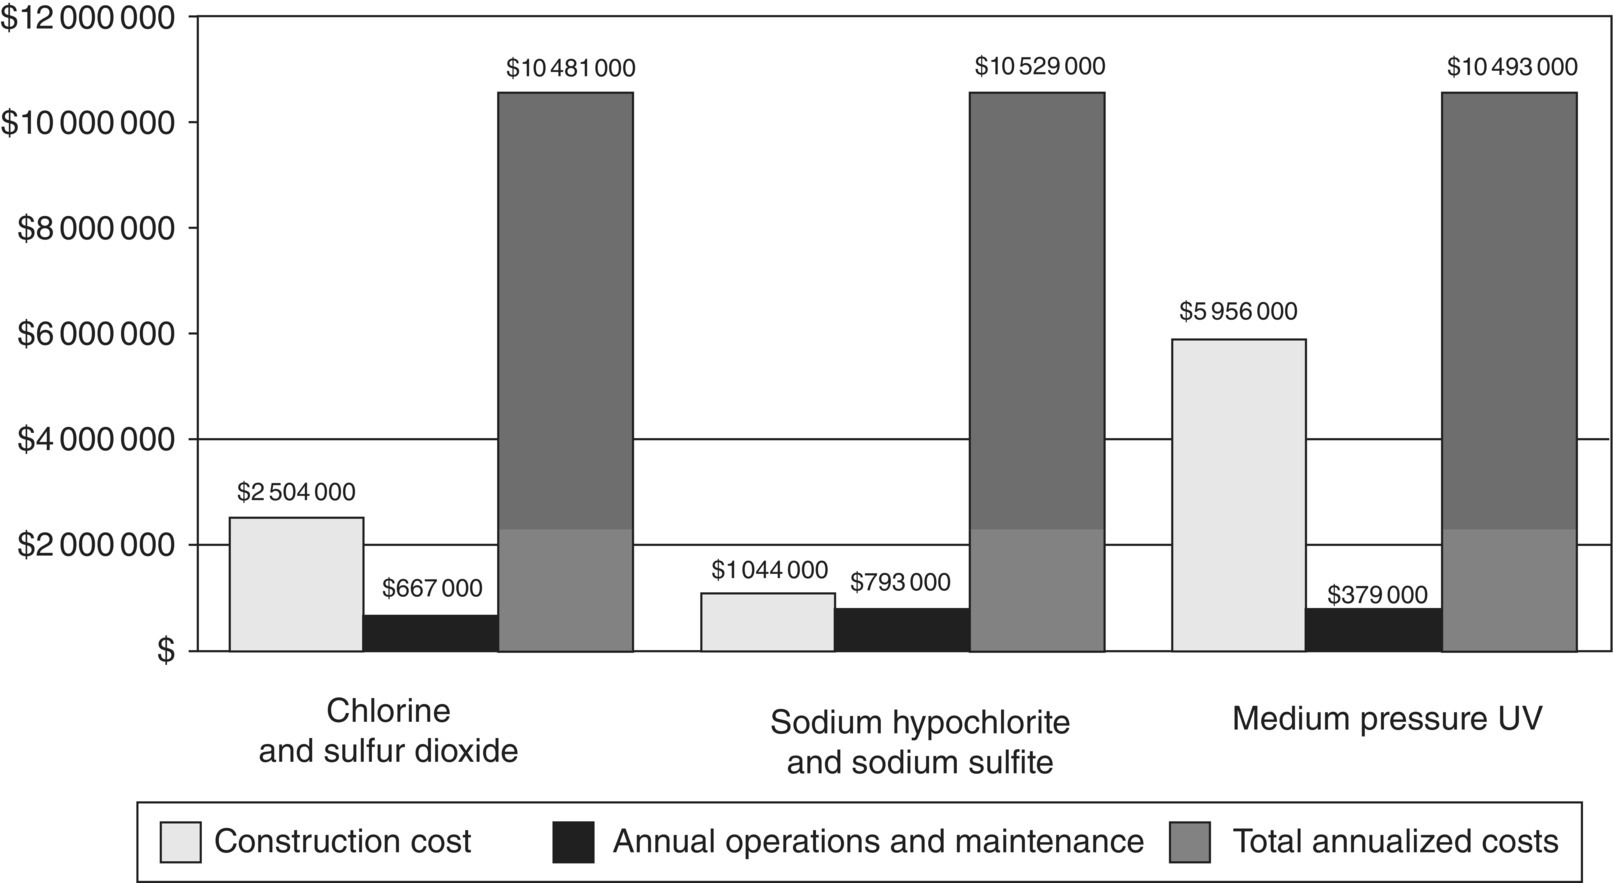 Clustered bar graph illustrating the disinfection system cost comparison of an 18-mgd facility, with 3 sets of 3 bars for chlorine and sulfur dioxide, sodium hypochlorite and sodium sulfite, and medium pressure UV.